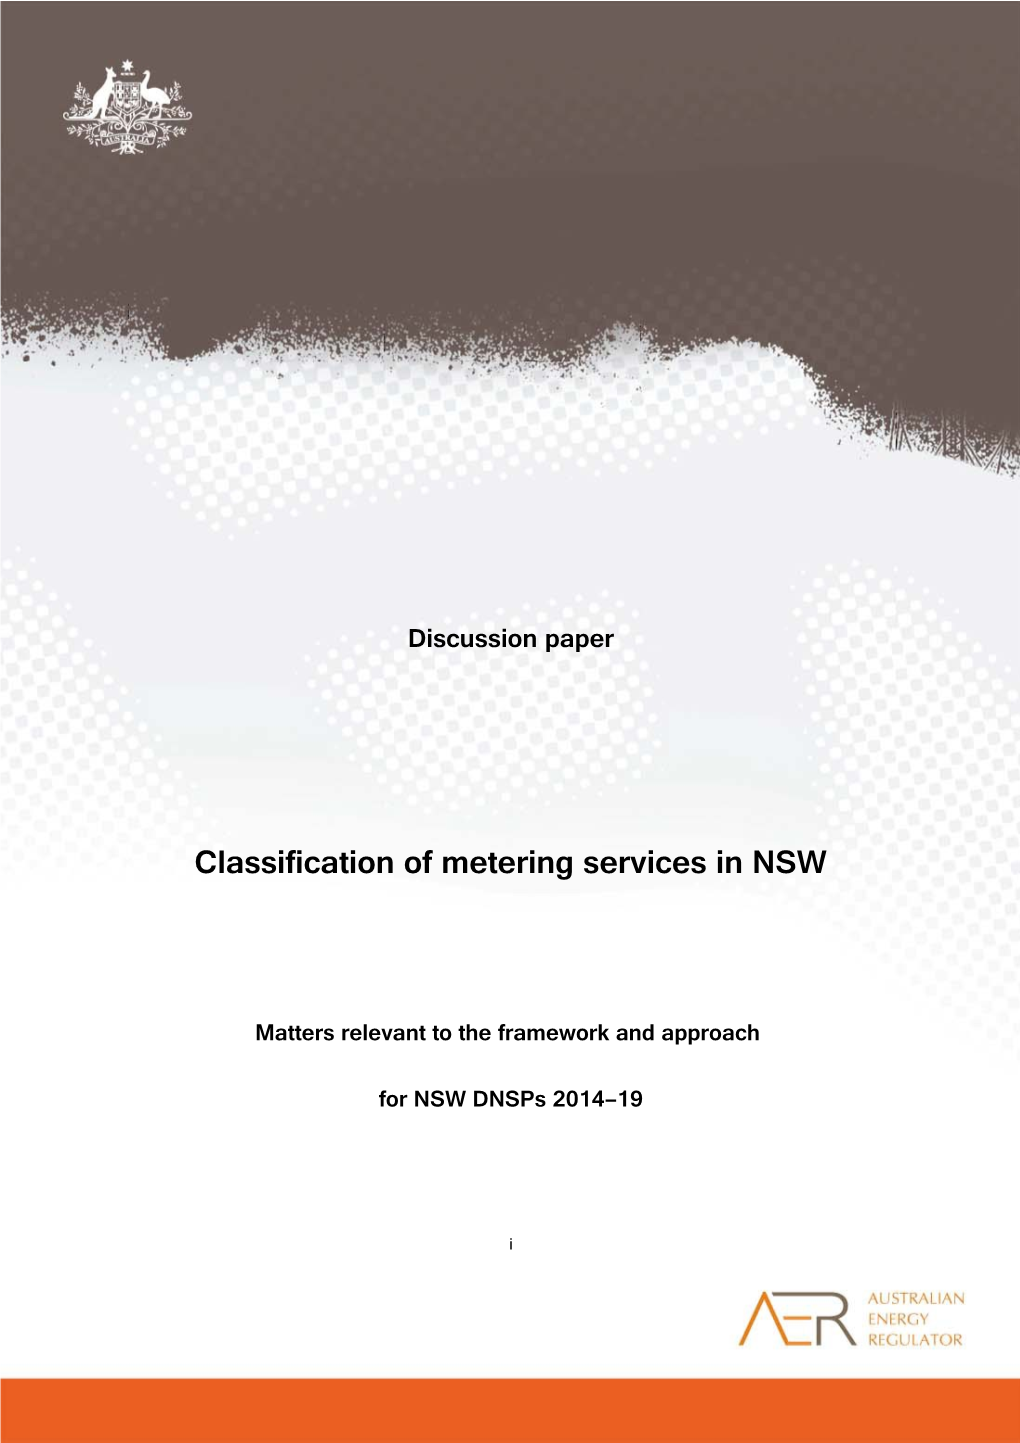 Classification of Metering Services in NSW